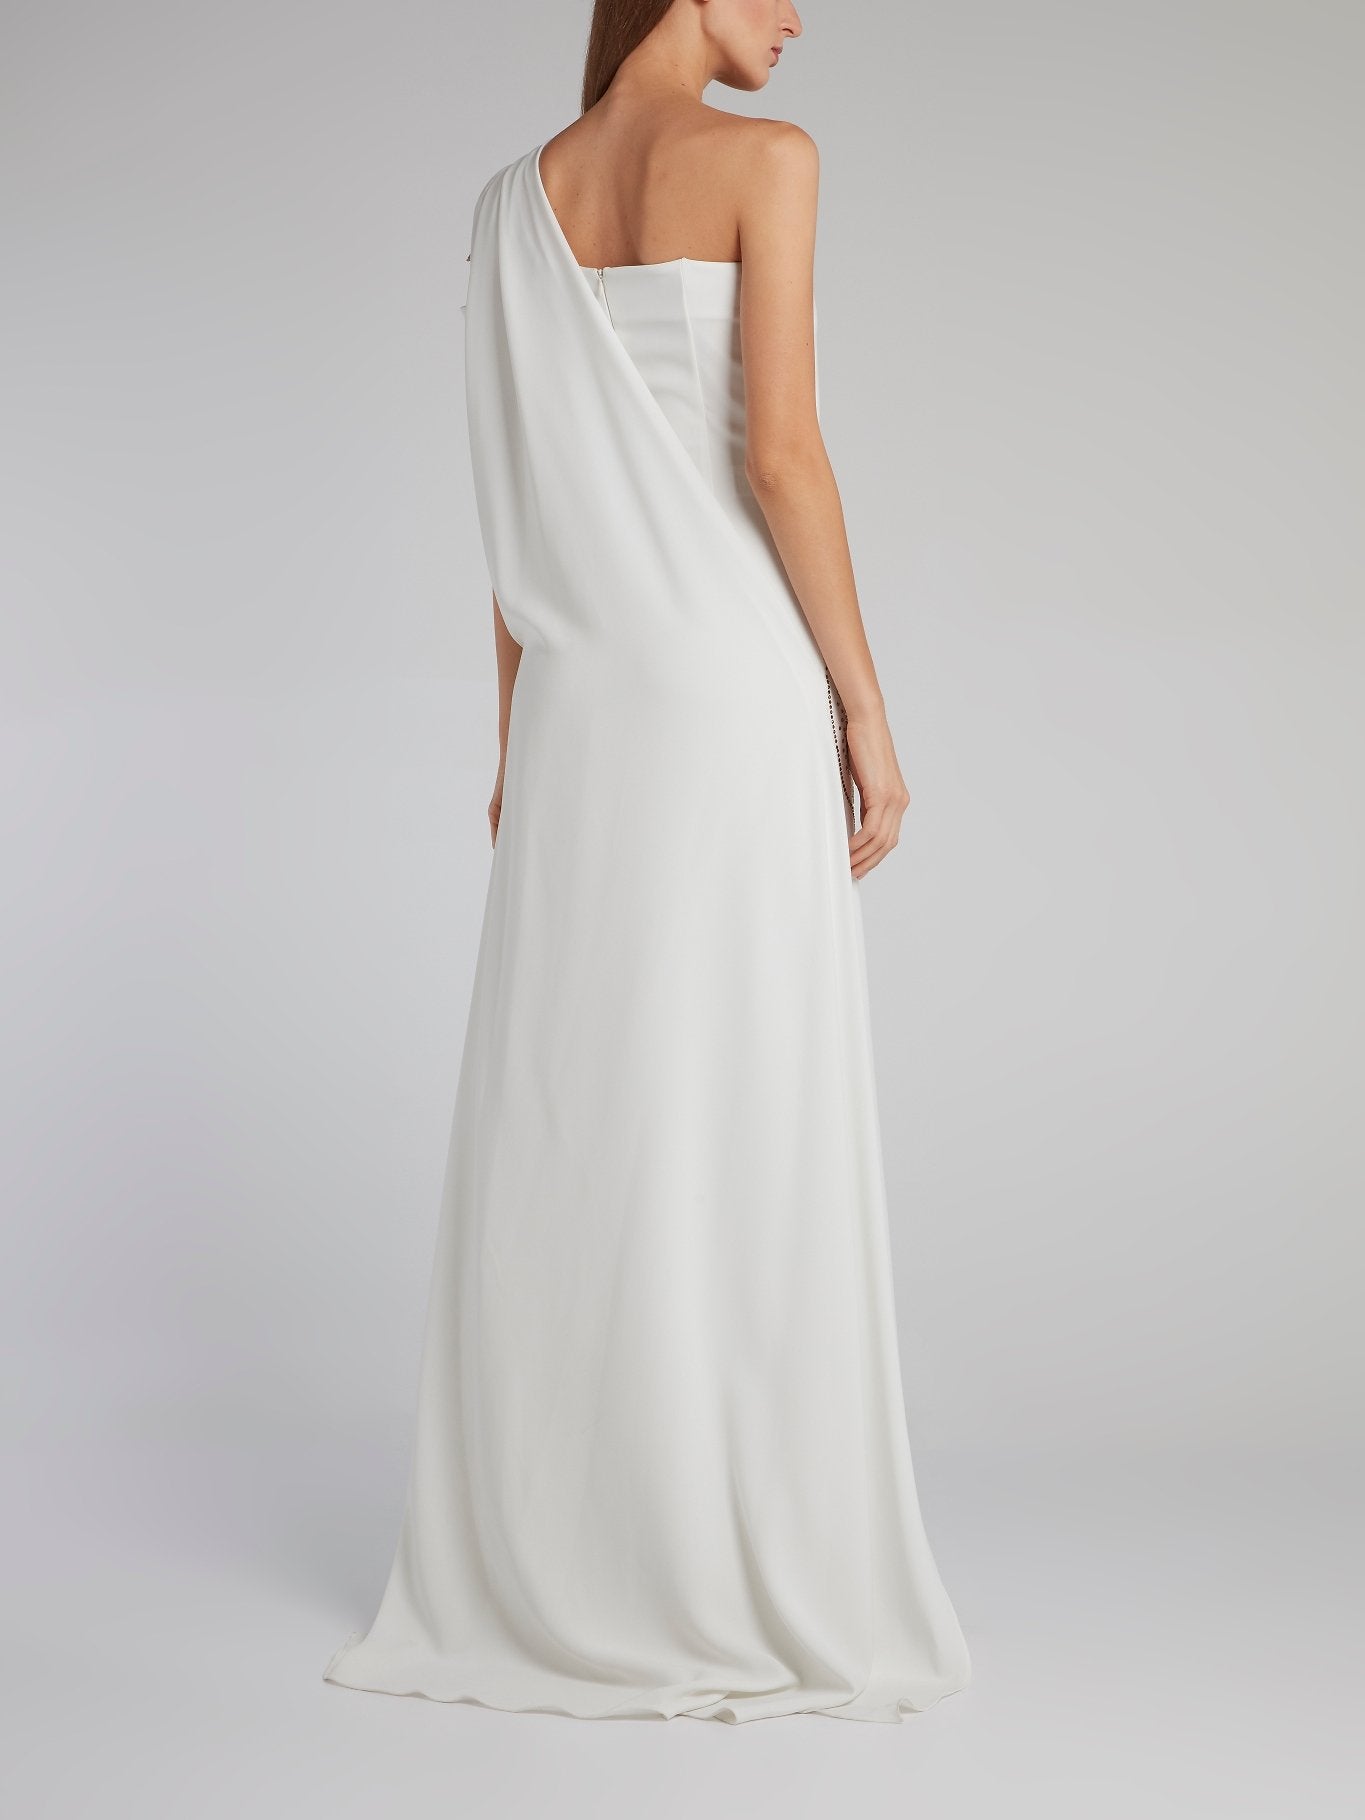 White One-Shoulder Multi-Stud Gown